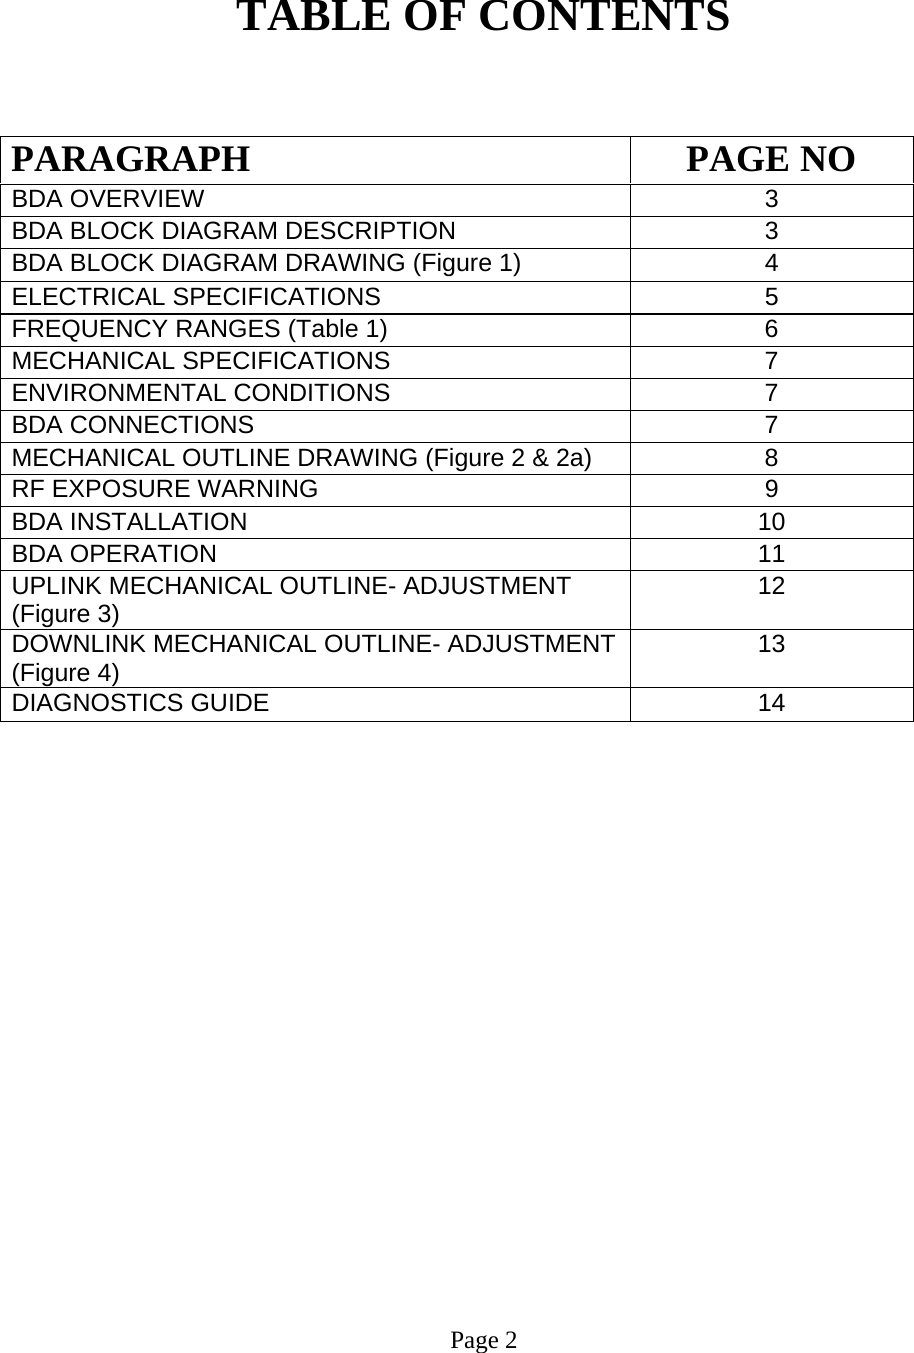     TABLE OF CONTENTS   PARAGRAPH PAGE NO BDA OVERVIEW   3 BDA BLOCK DIAGRAM DESCRIPTION 3 BDA BLOCK DIAGRAM DRAWING (Figure 1)  4 ELECTRICAL SPECIFICATIONS   5  FREQUENCY RANGES (Table 1)  6 MECHANICAL SPECIFICATIONS   7  ENVIRONMENTAL CONDITIONS   7  BDA CONNECTIONS    7  MECHANICAL OUTLINE DRAWING (Figure 2 &amp; 2a)  8  RF EXPOSURE WARNING   9  BDA INSTALLATION  10  BDA OPERATION 11  UPLINK MECHANICAL OUTLINE- ADJUSTMENT (Figure 3)  12  DOWNLINK MECHANICAL OUTLINE- ADJUSTMENT (Figure 4)  13 DIAGNOSTICS GUIDE  14                       Page 2 